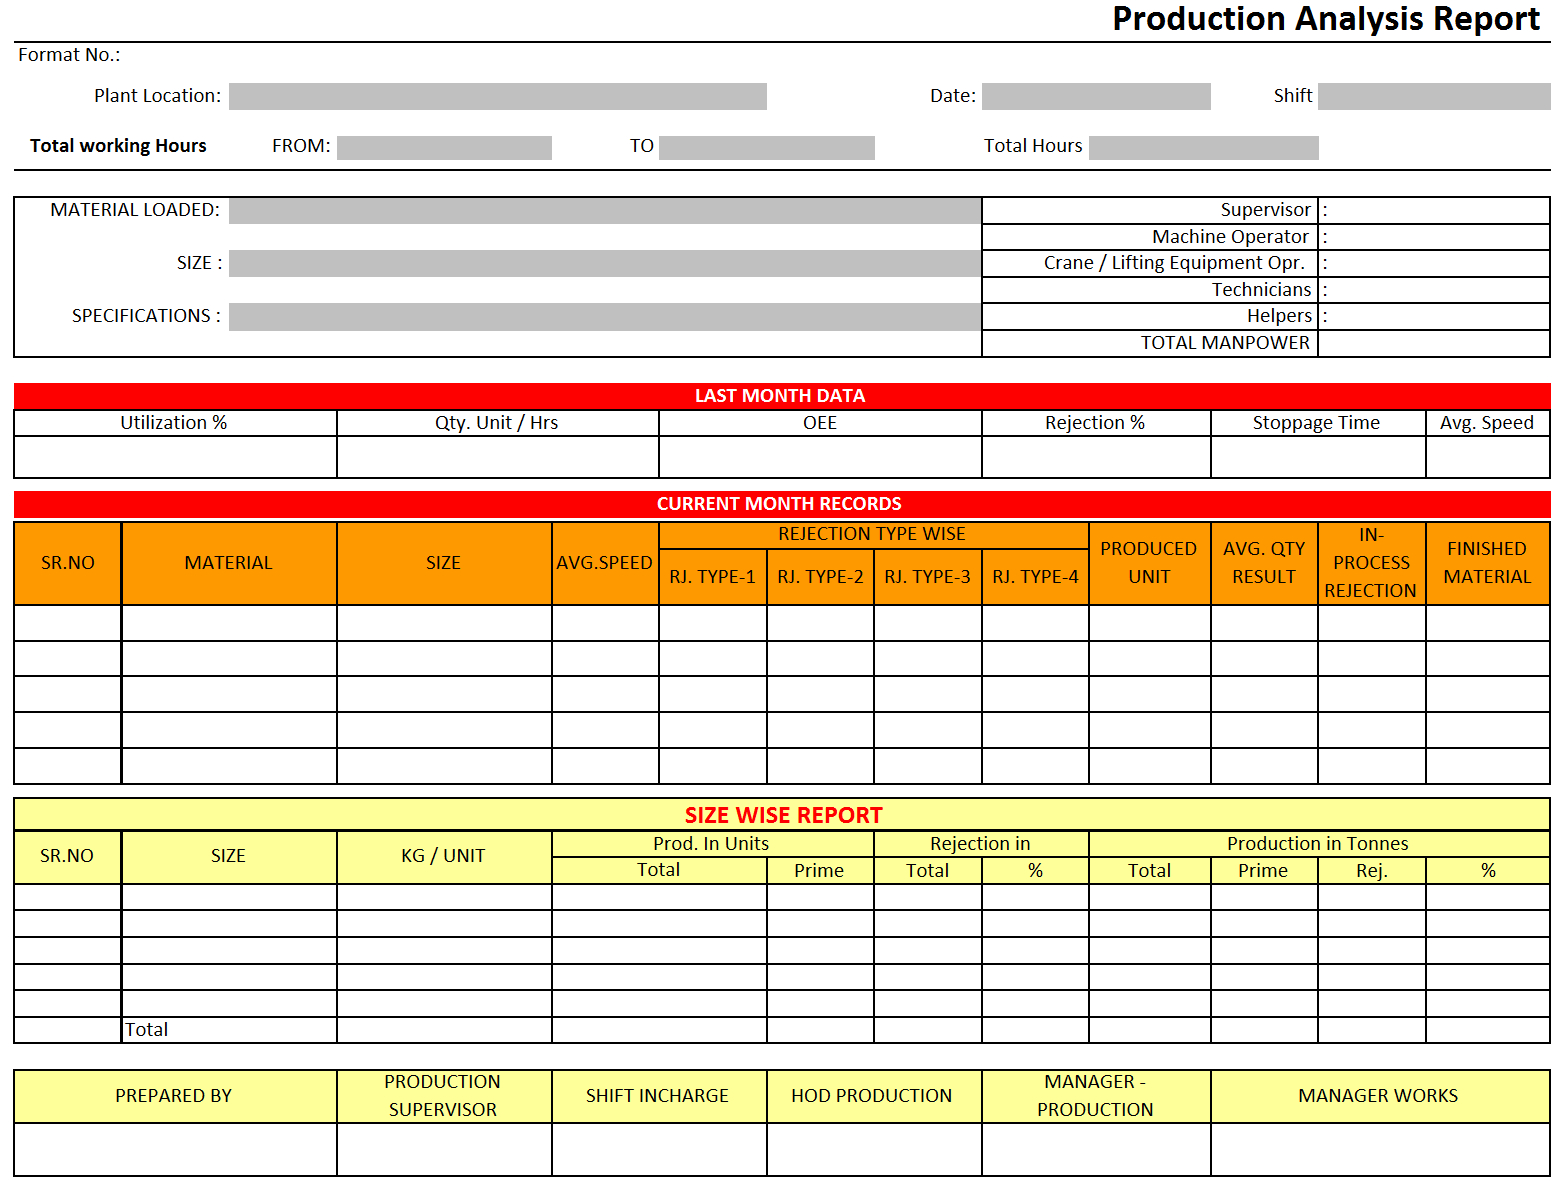 Production Analysis Report – Inside Company Analysis Report Template